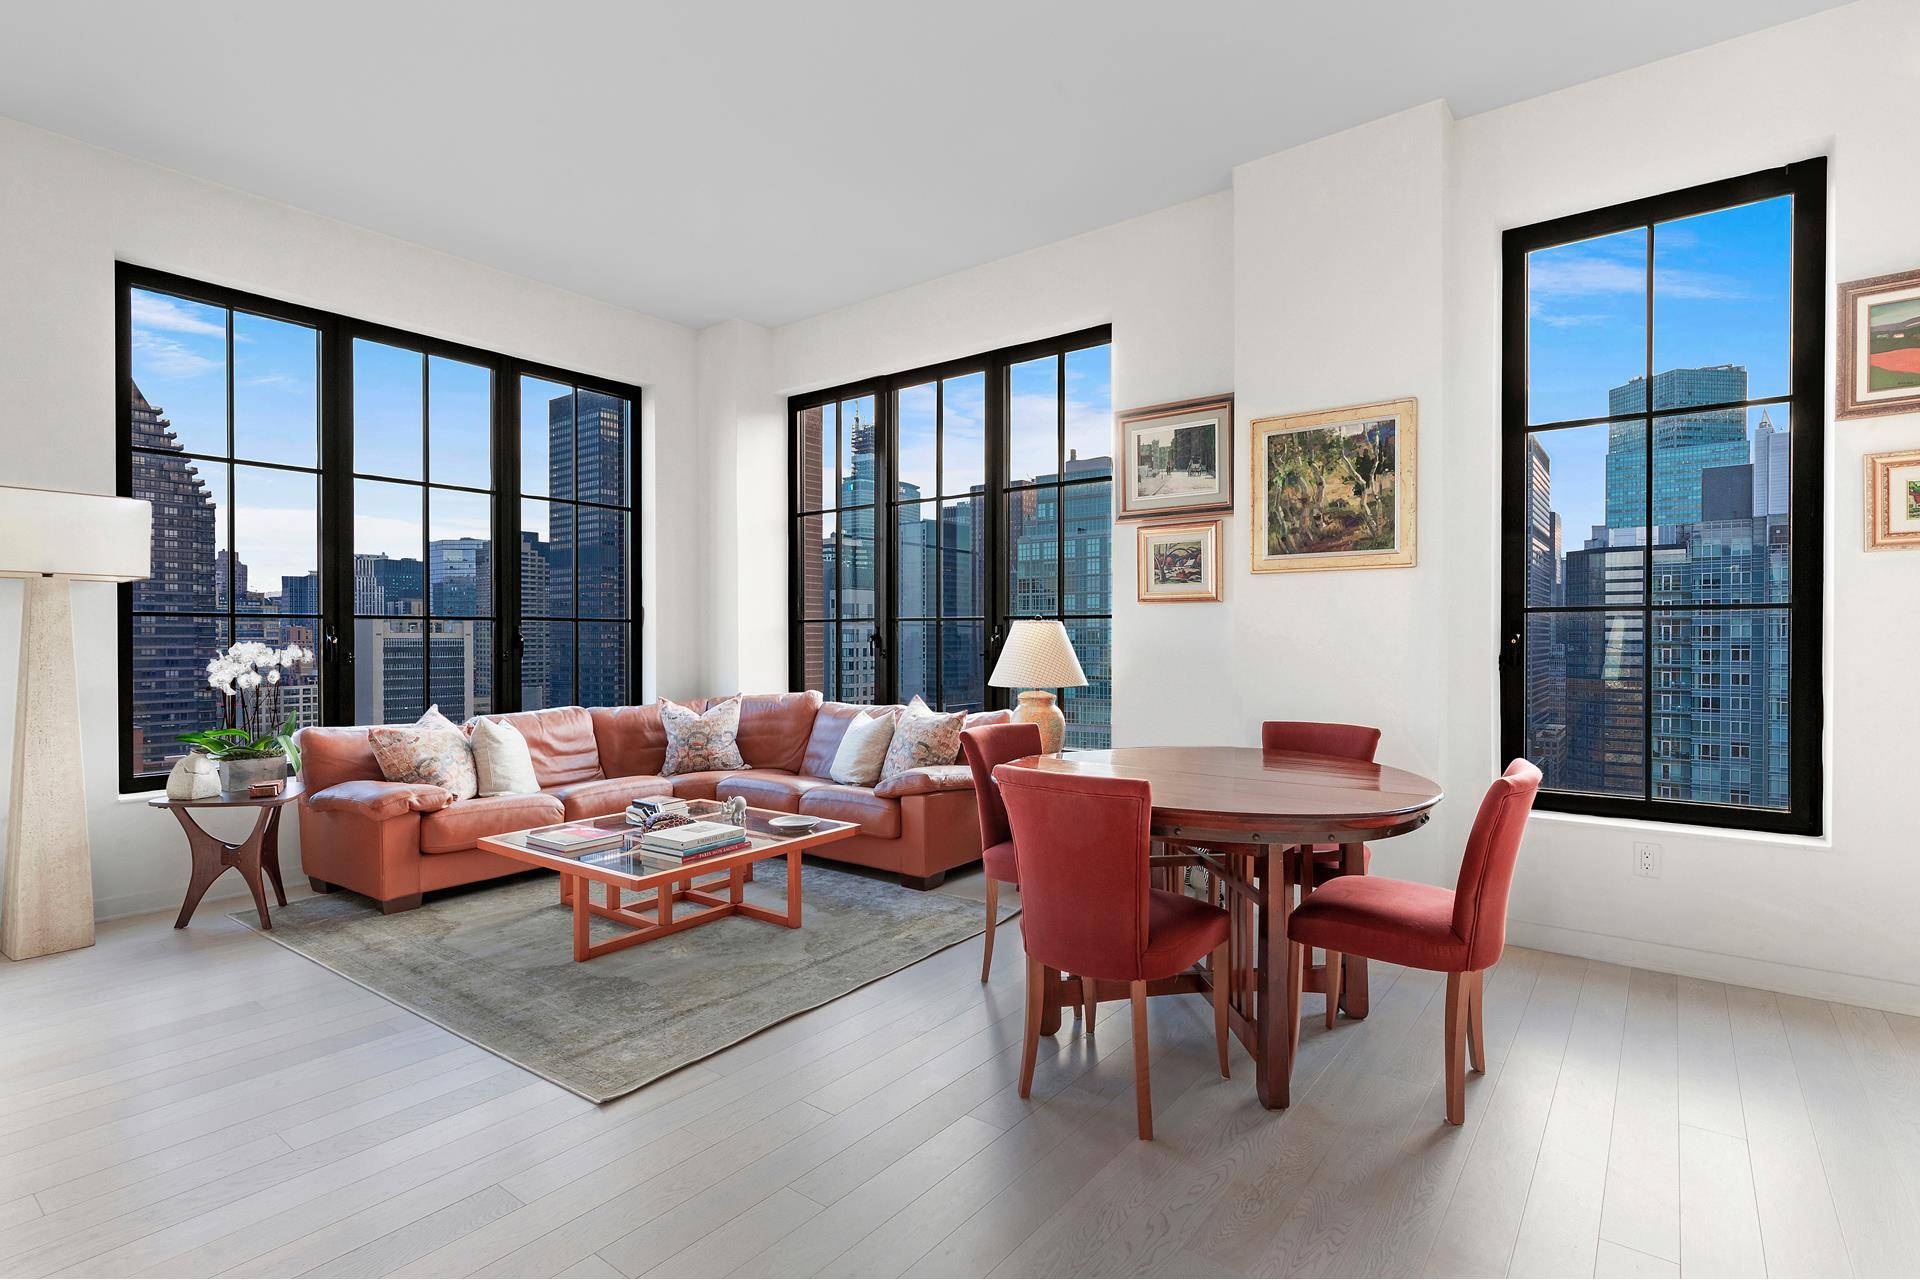 Perched on the 25th floor of The Sutton a full service condominium, a striking new luxury residence redefining the premier Sutton Place neighborhood !